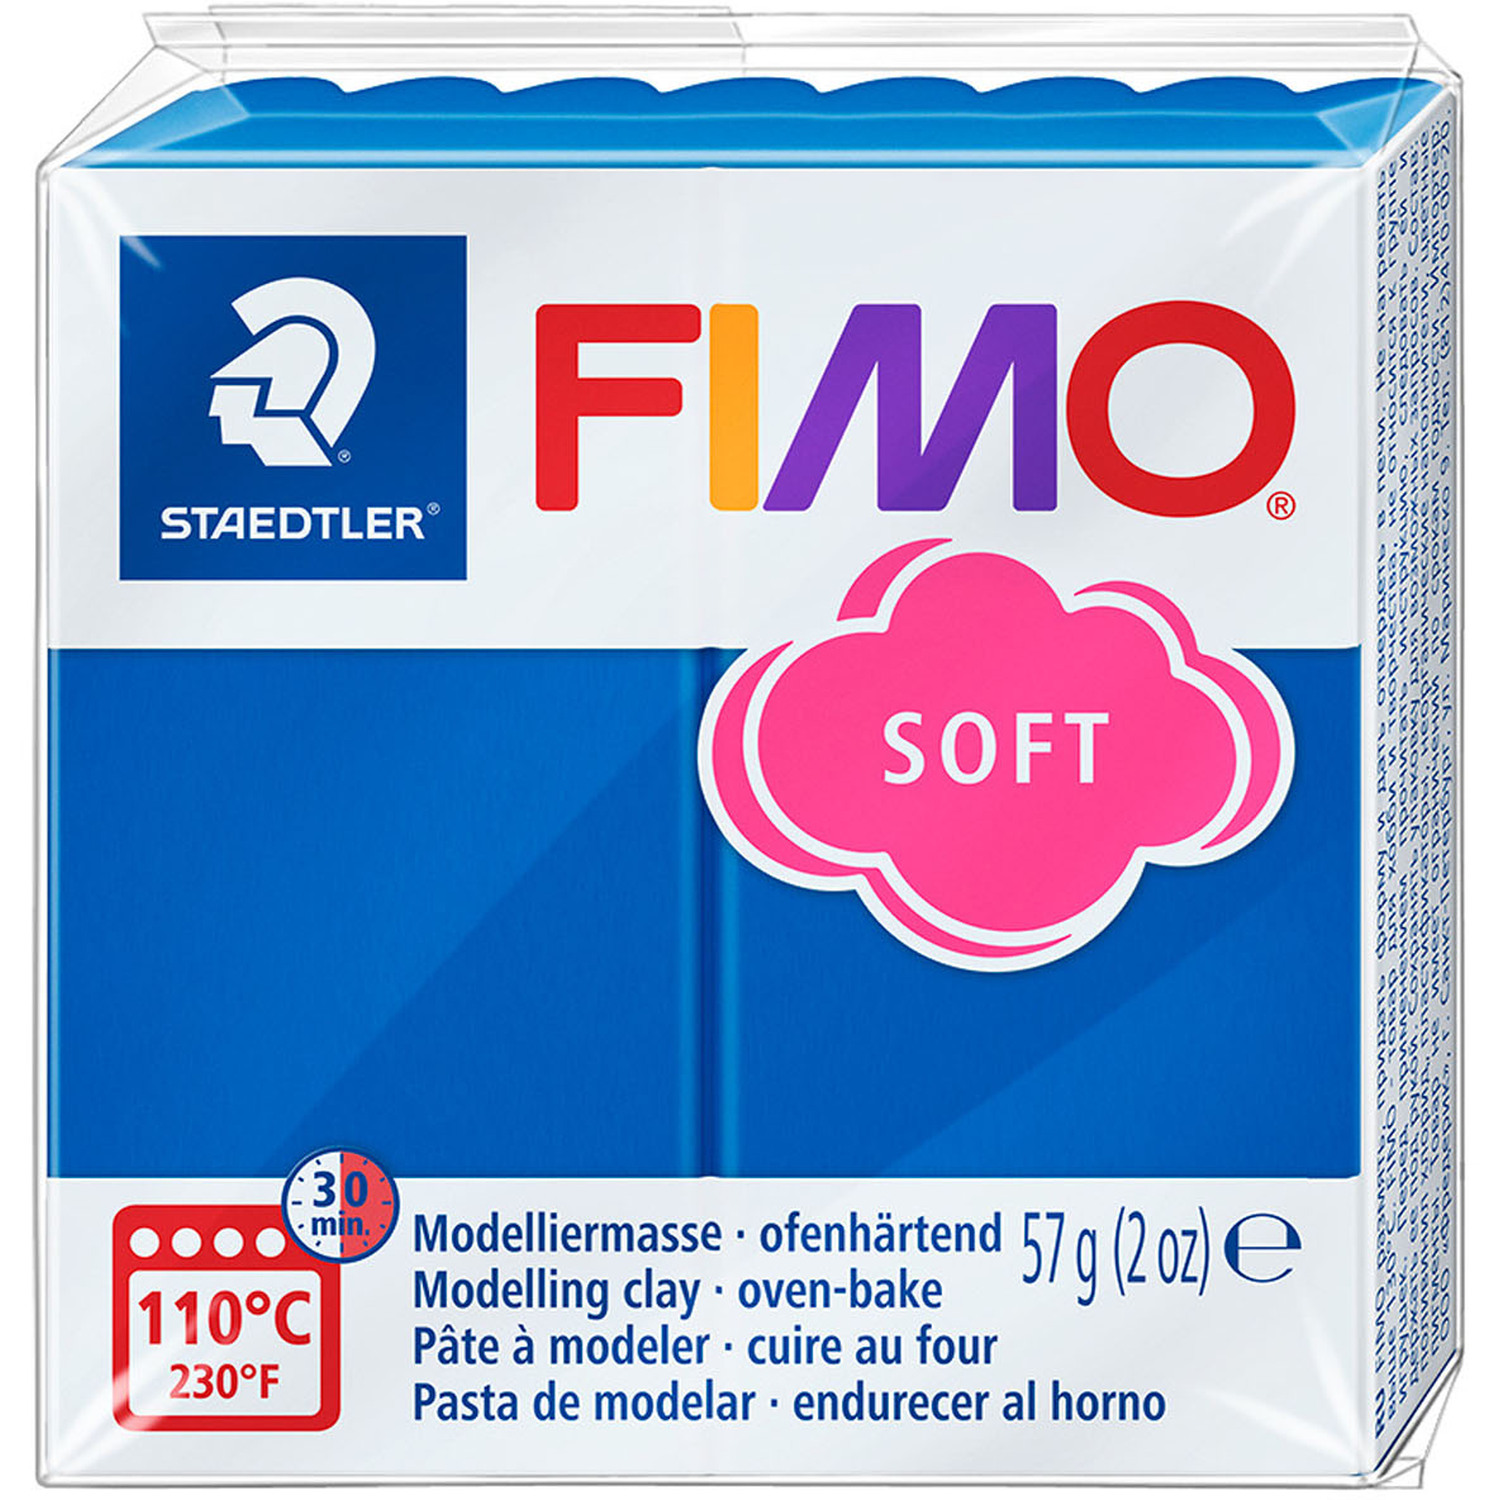 Staedtler FIMO Soft Modelling Clay Block - Pacific Blue Image 1